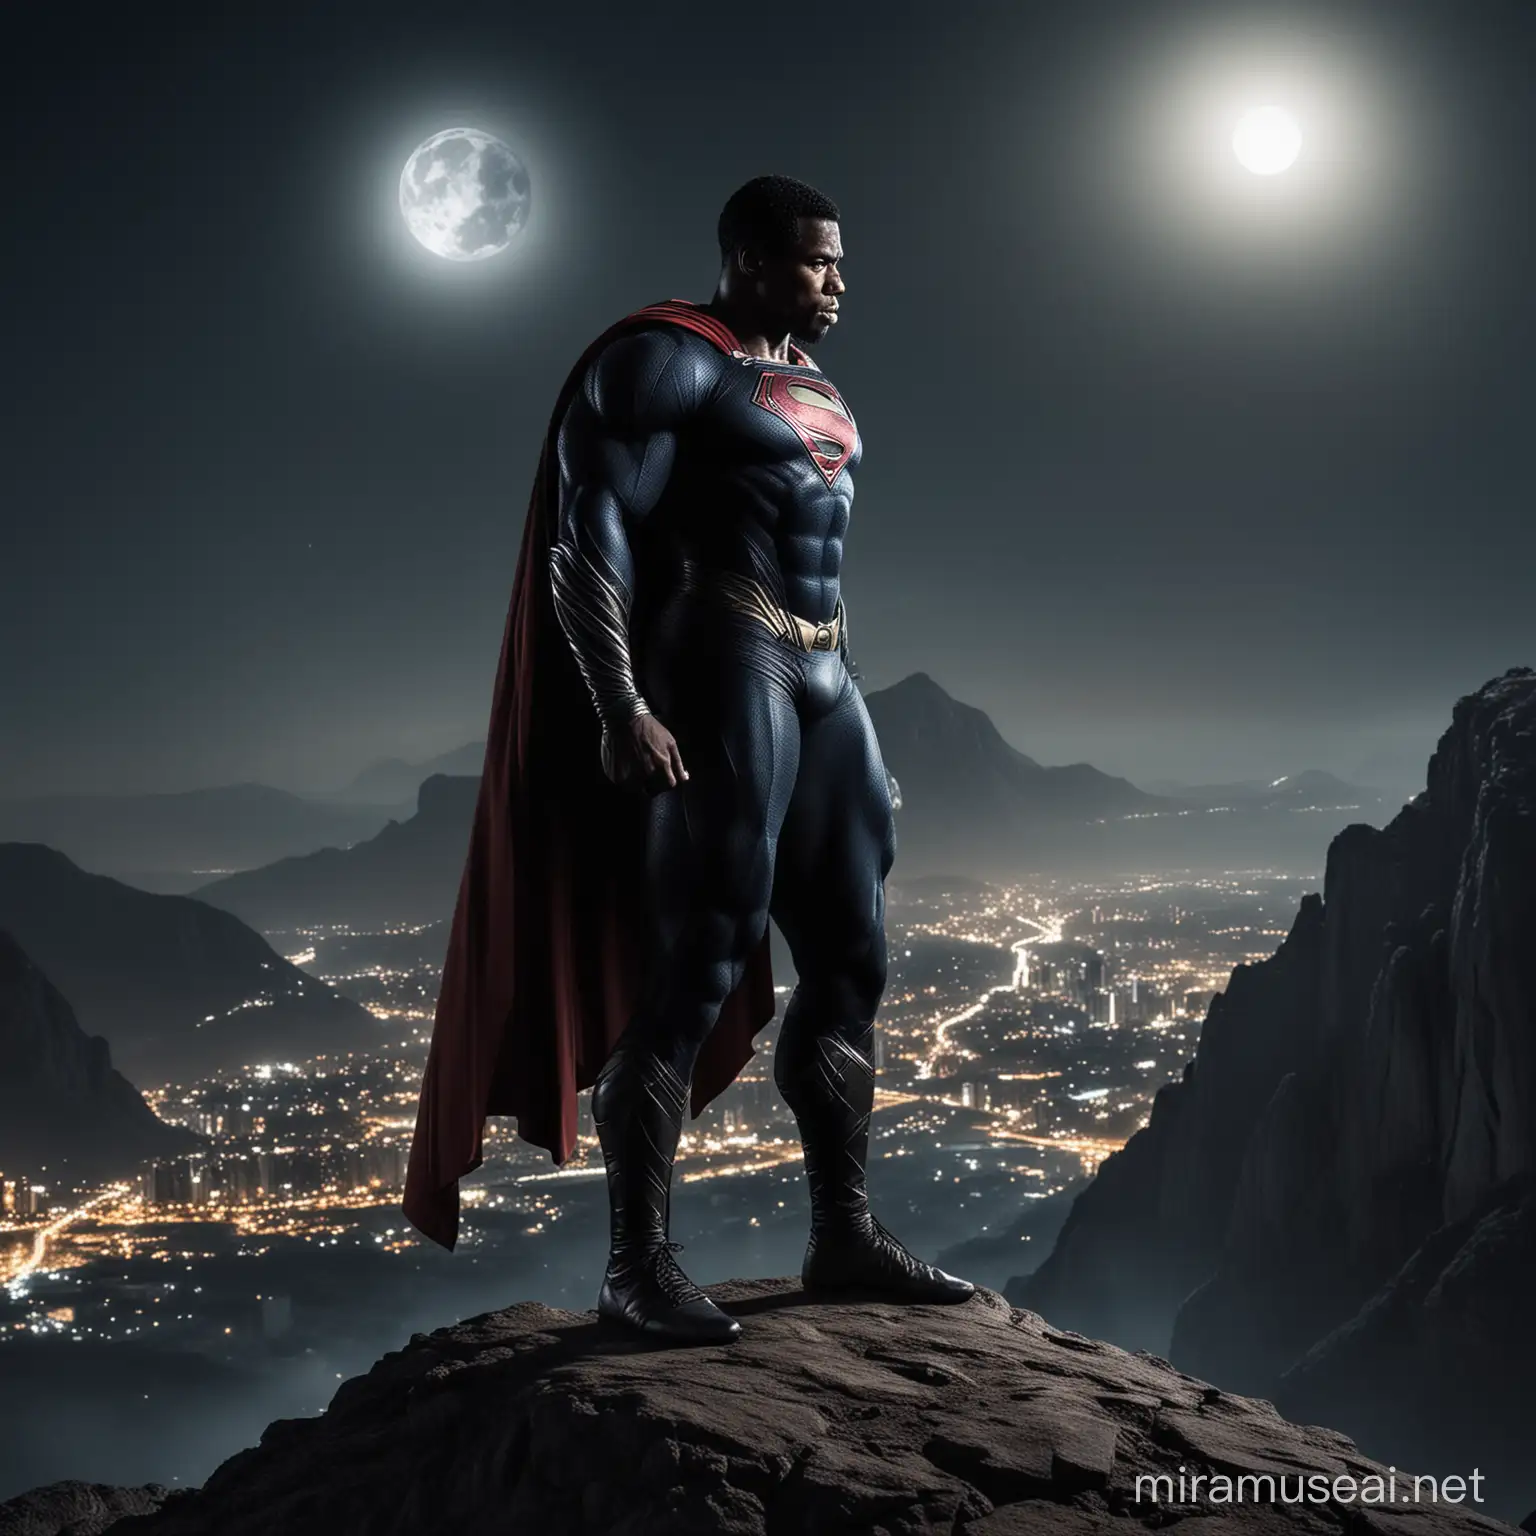 Majestic African Superman Overlooking Cityscape at Night